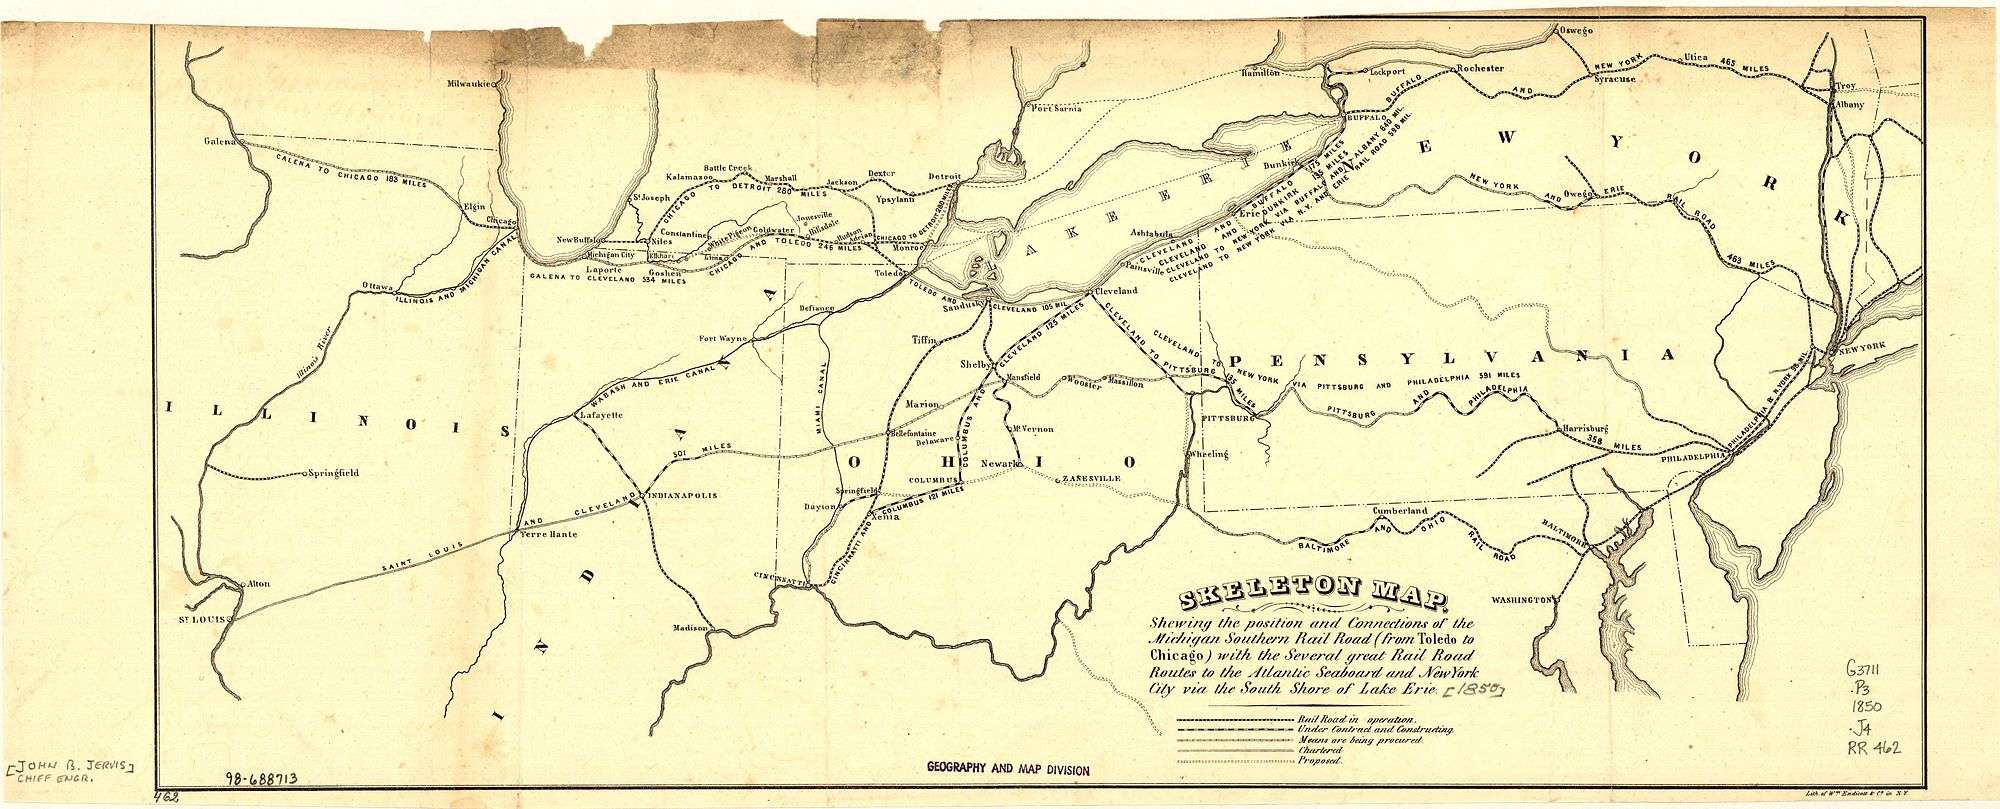 In this 1850 map, the original Wabash and Erie Canal is shown as part of an emerging system canals and rail lines